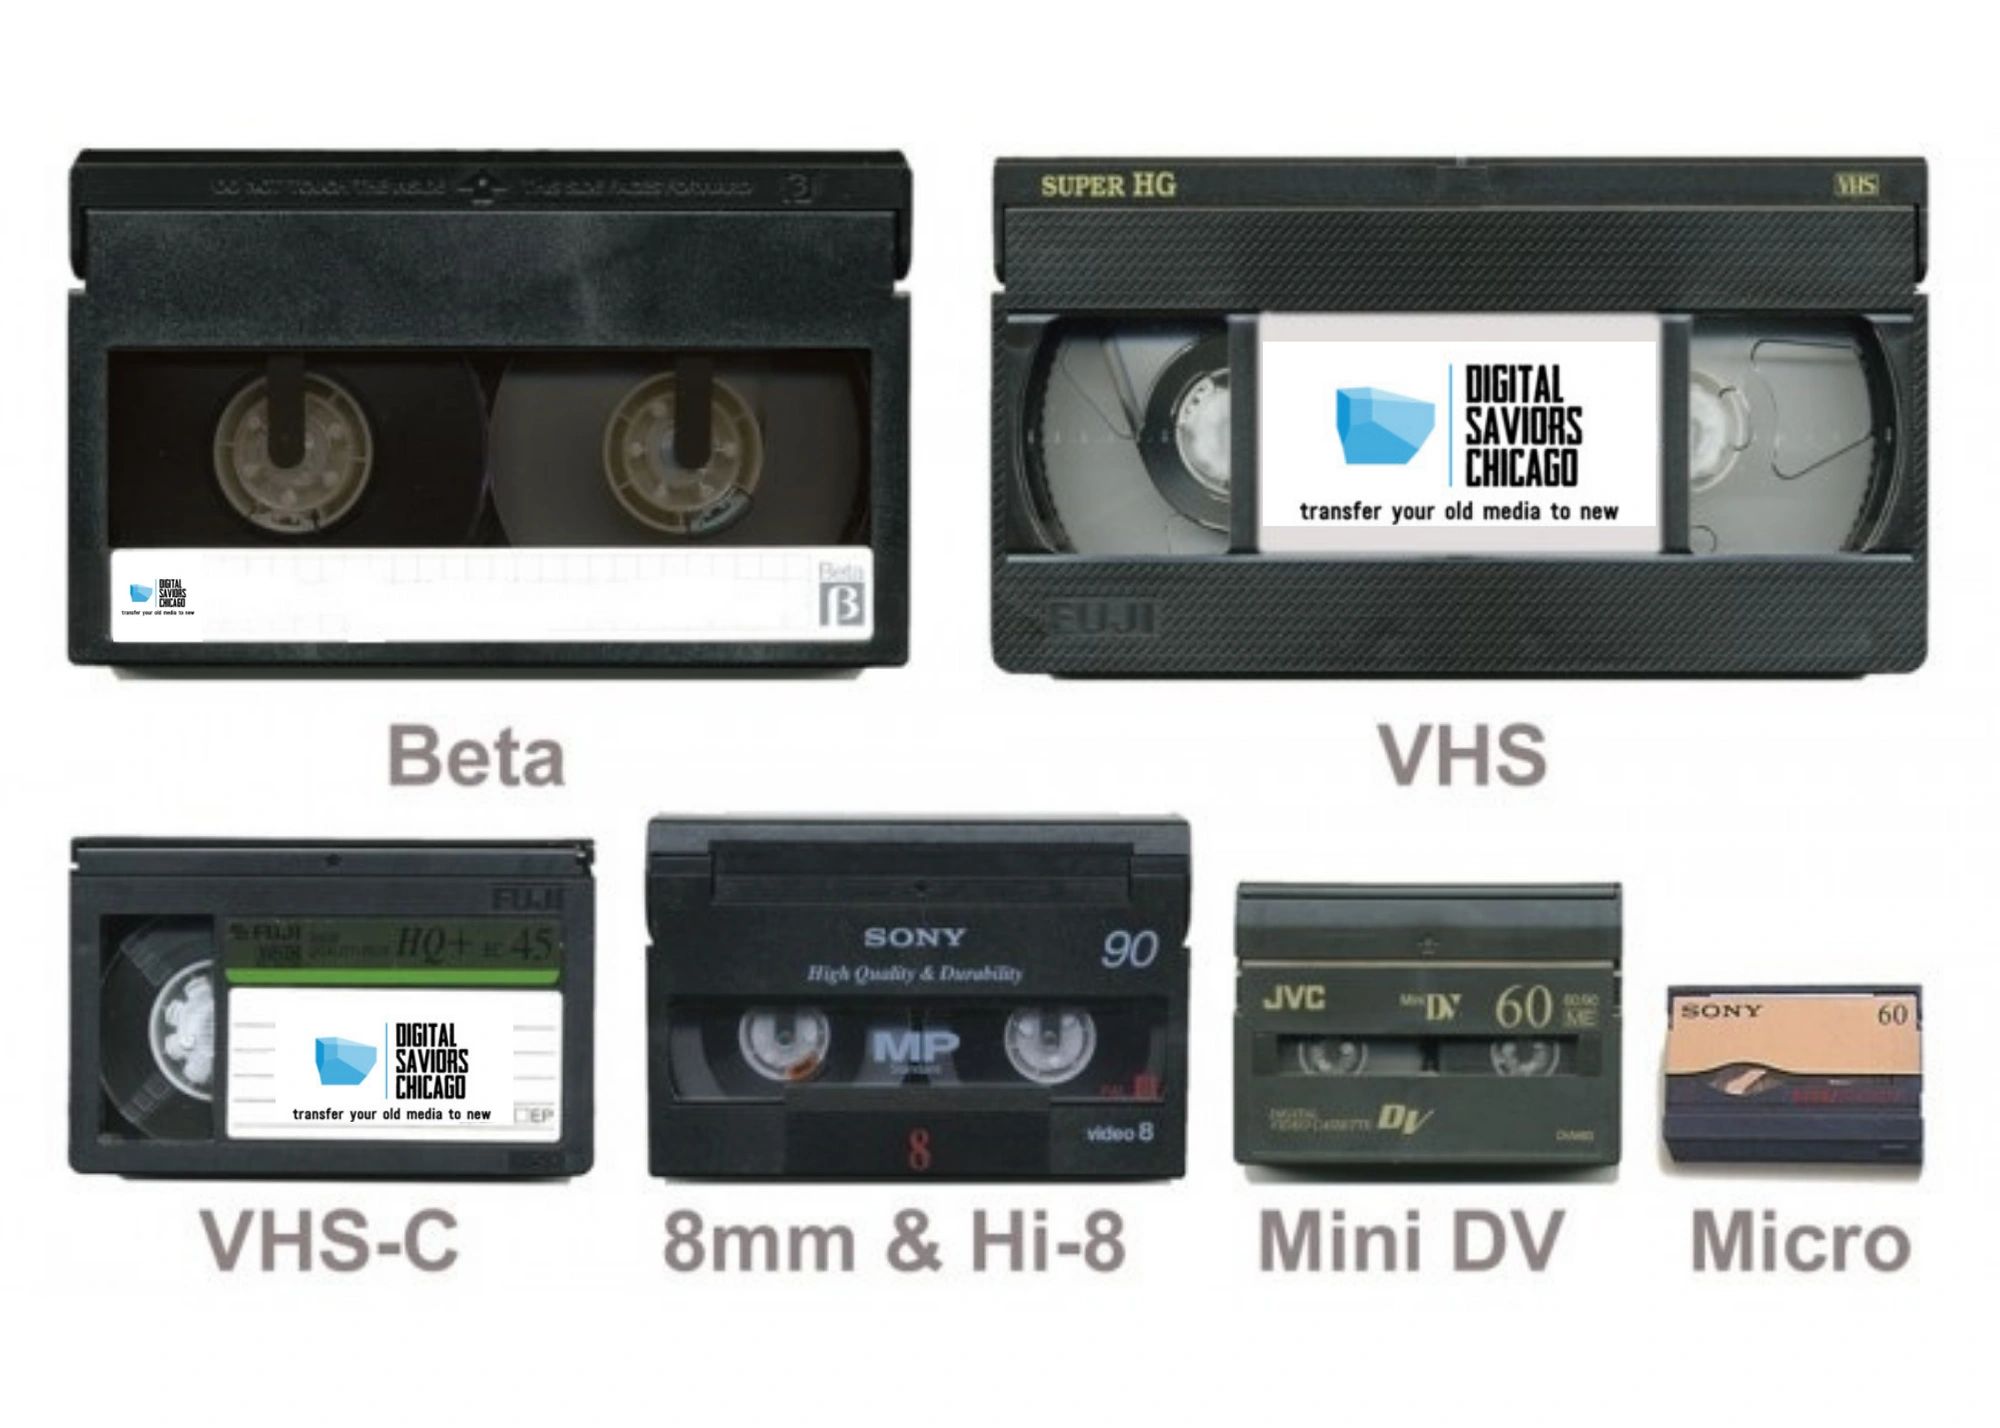 The difference between VHS and Beta tapes